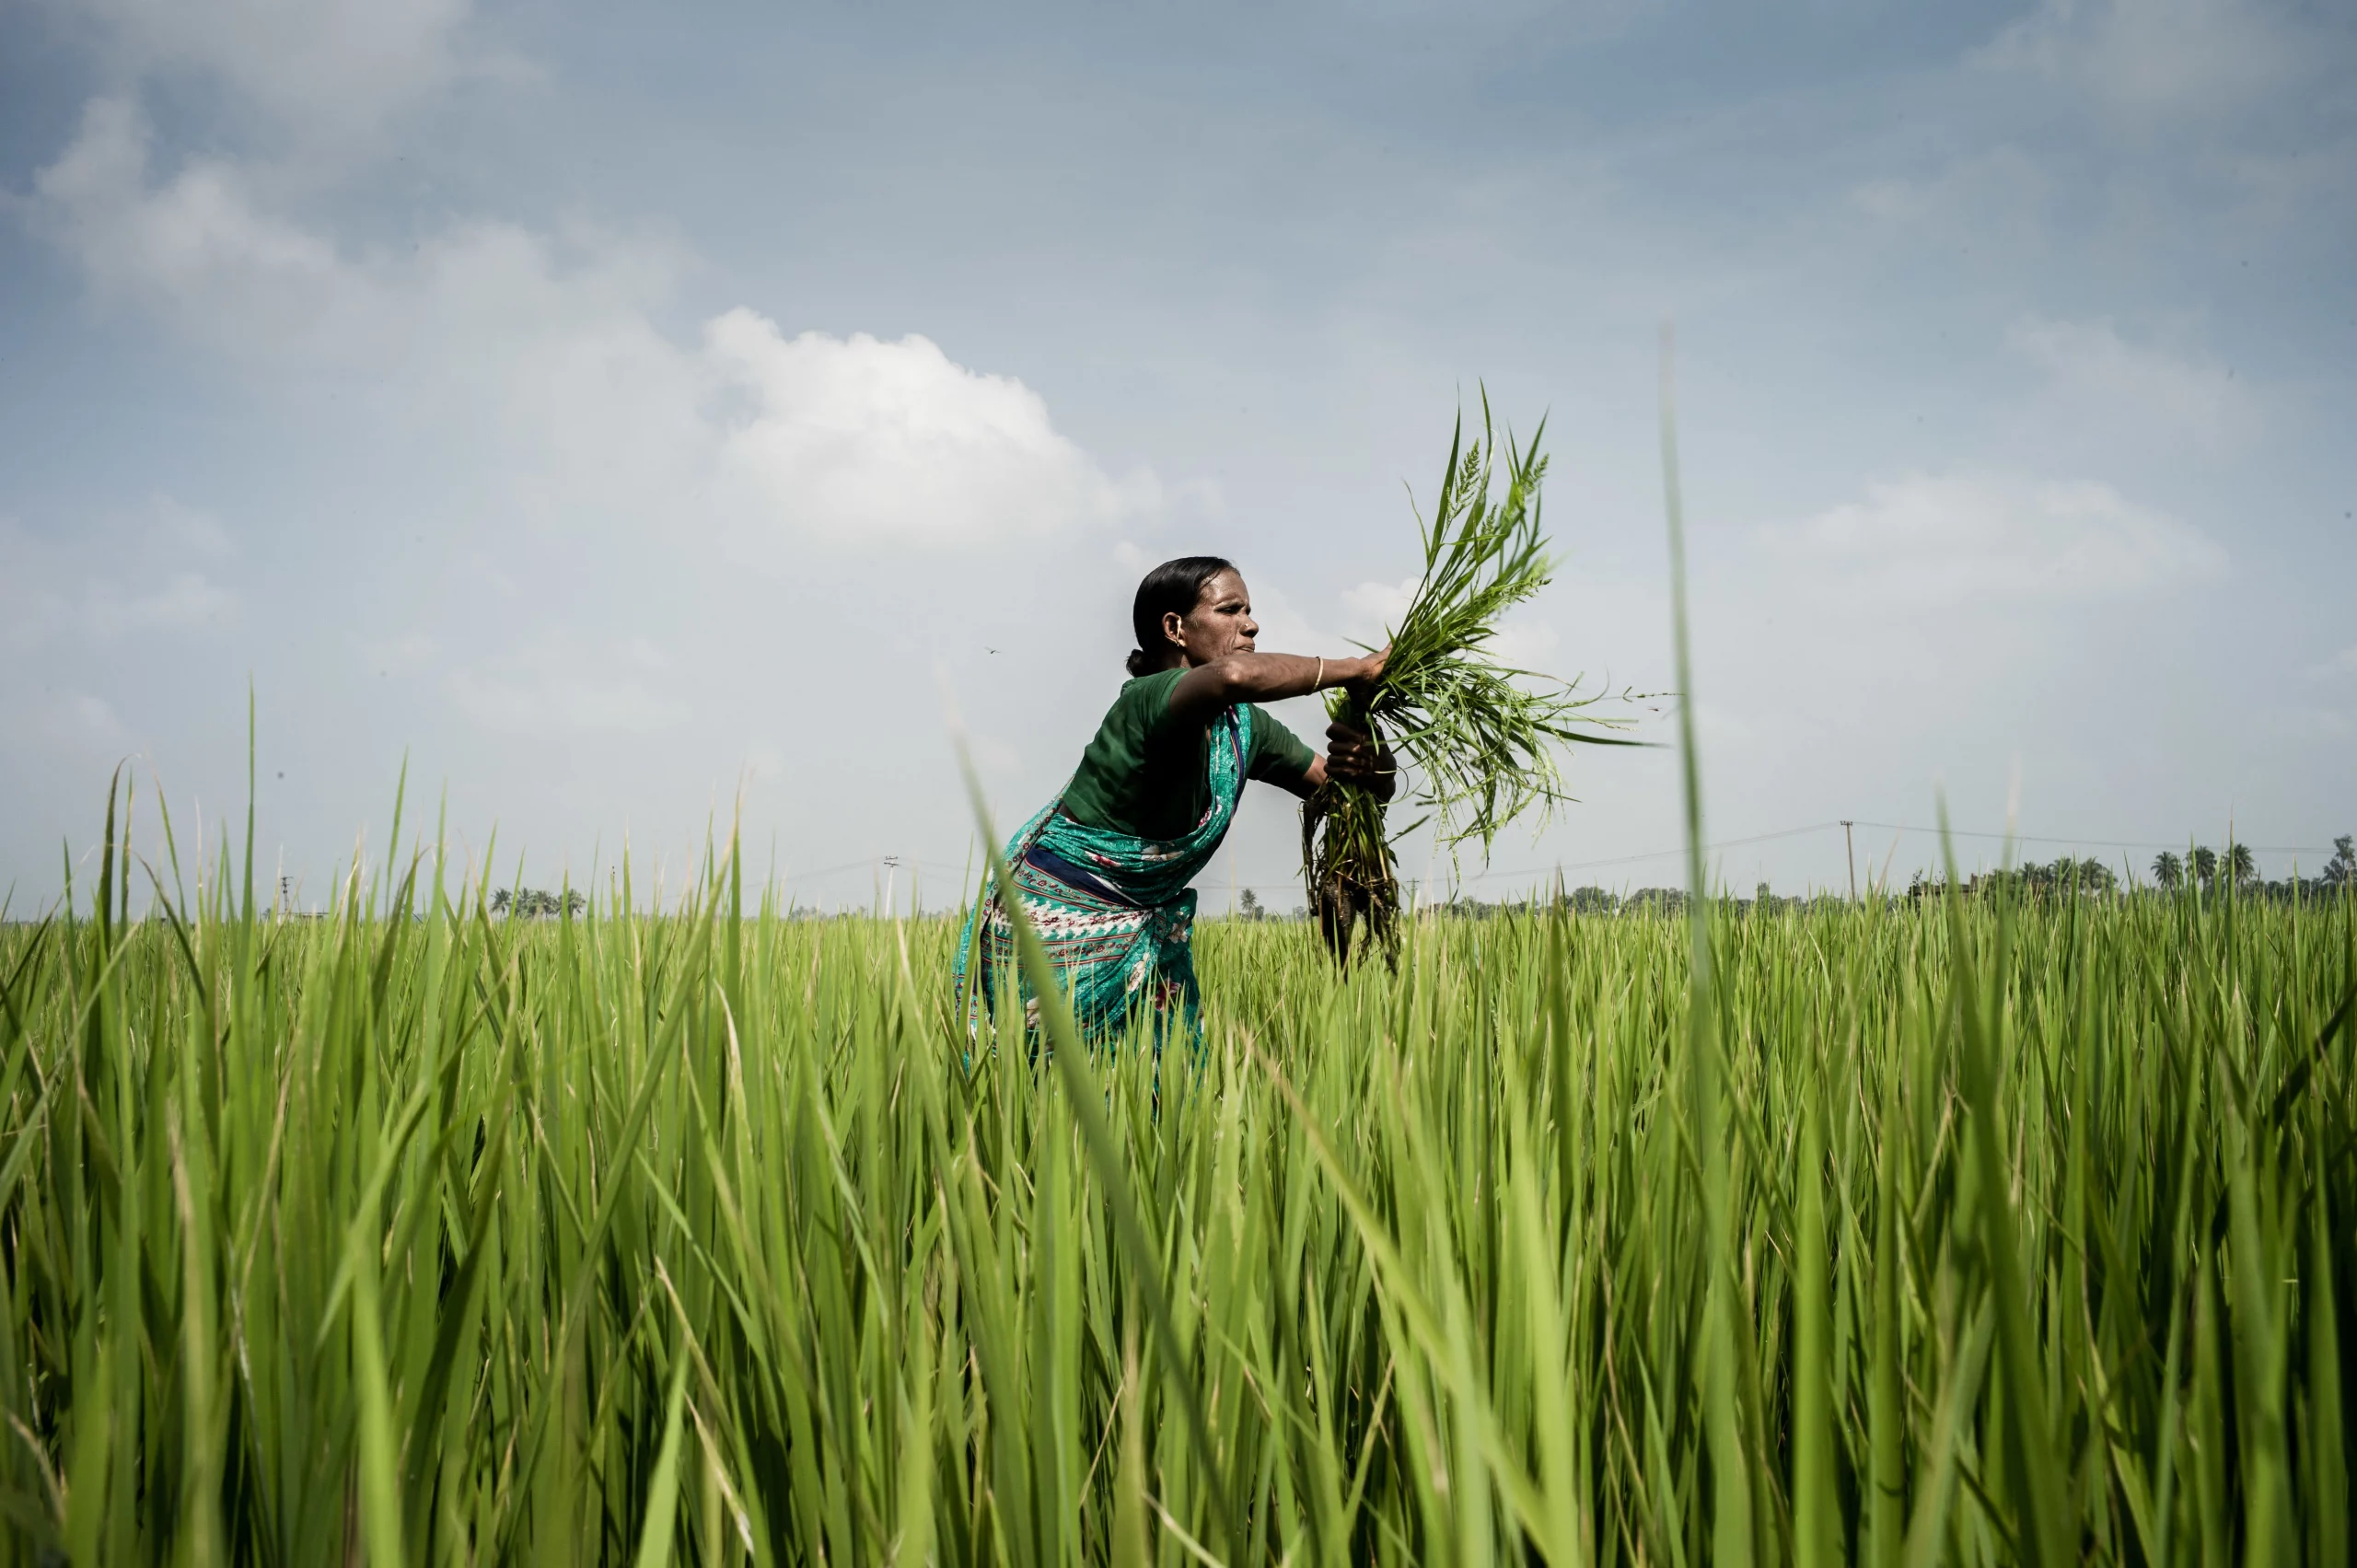 A woman farmer removing weeds in a paddy field in India